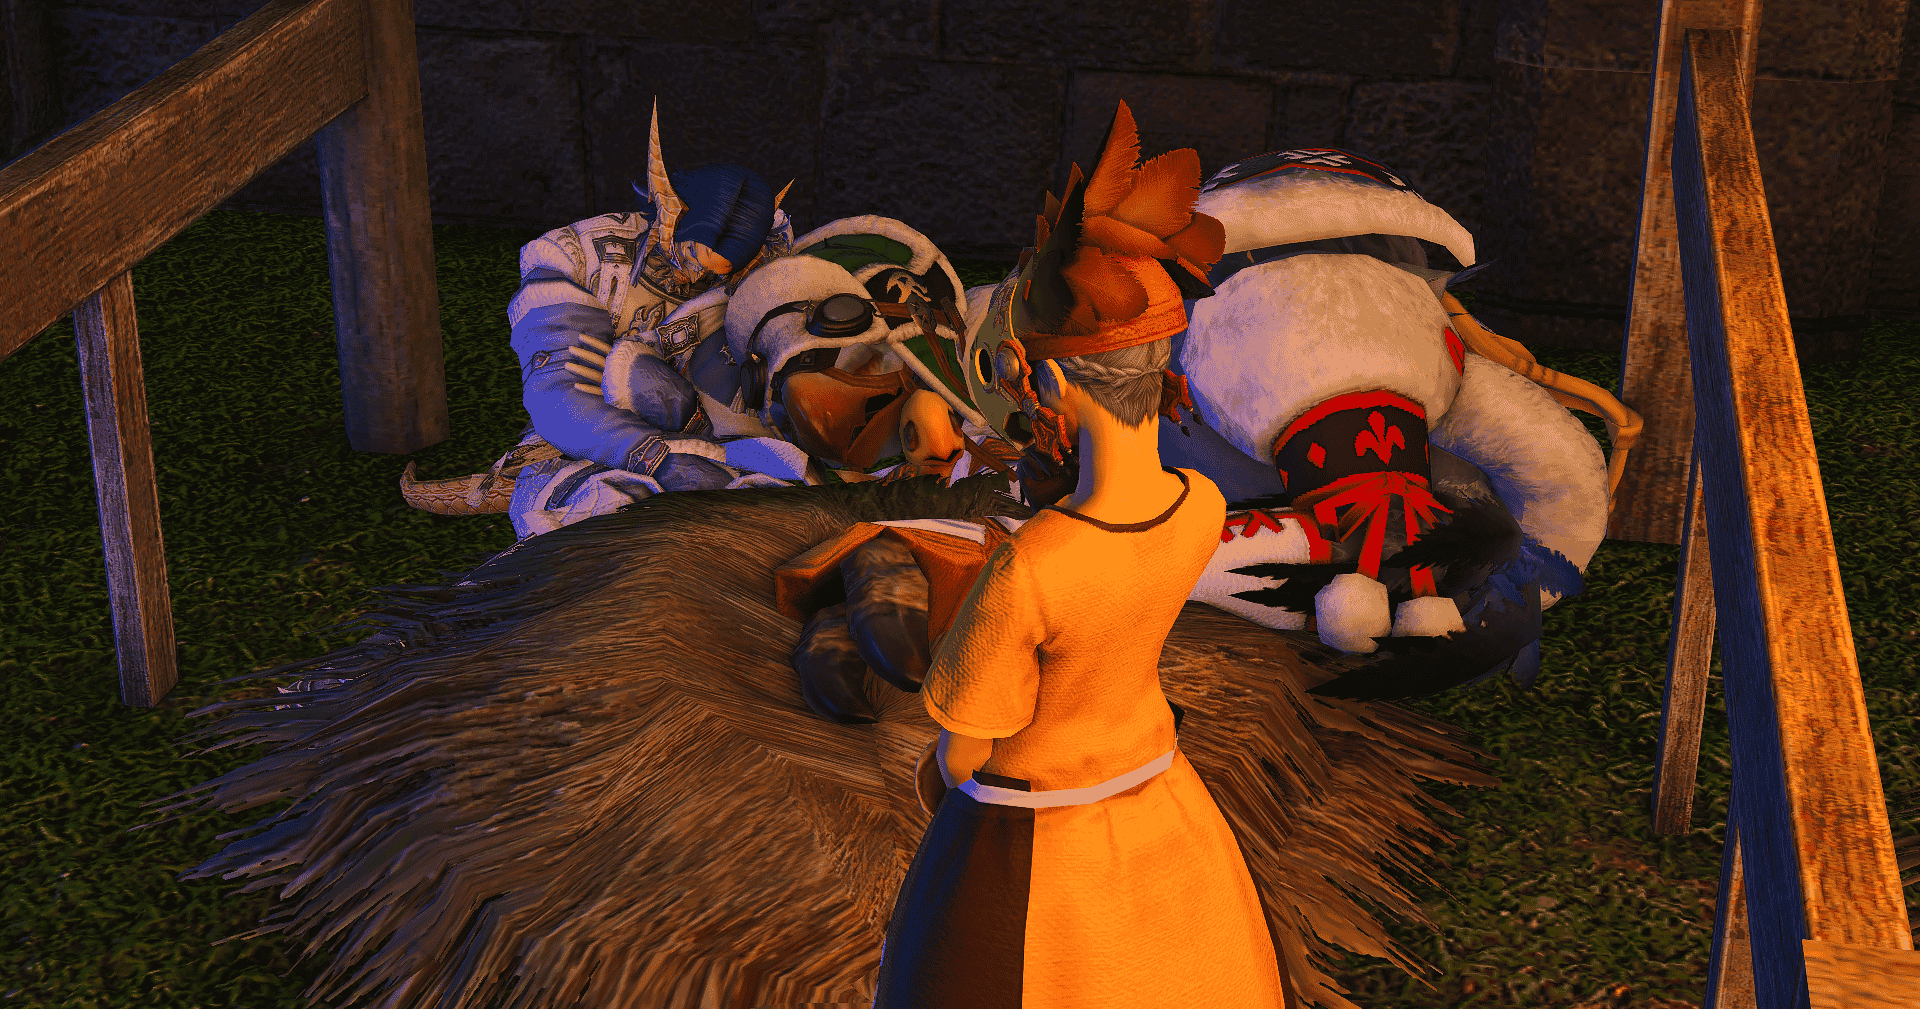 liolaeus sleeping in a chocobo stable with birds while the chocobo keep looks on